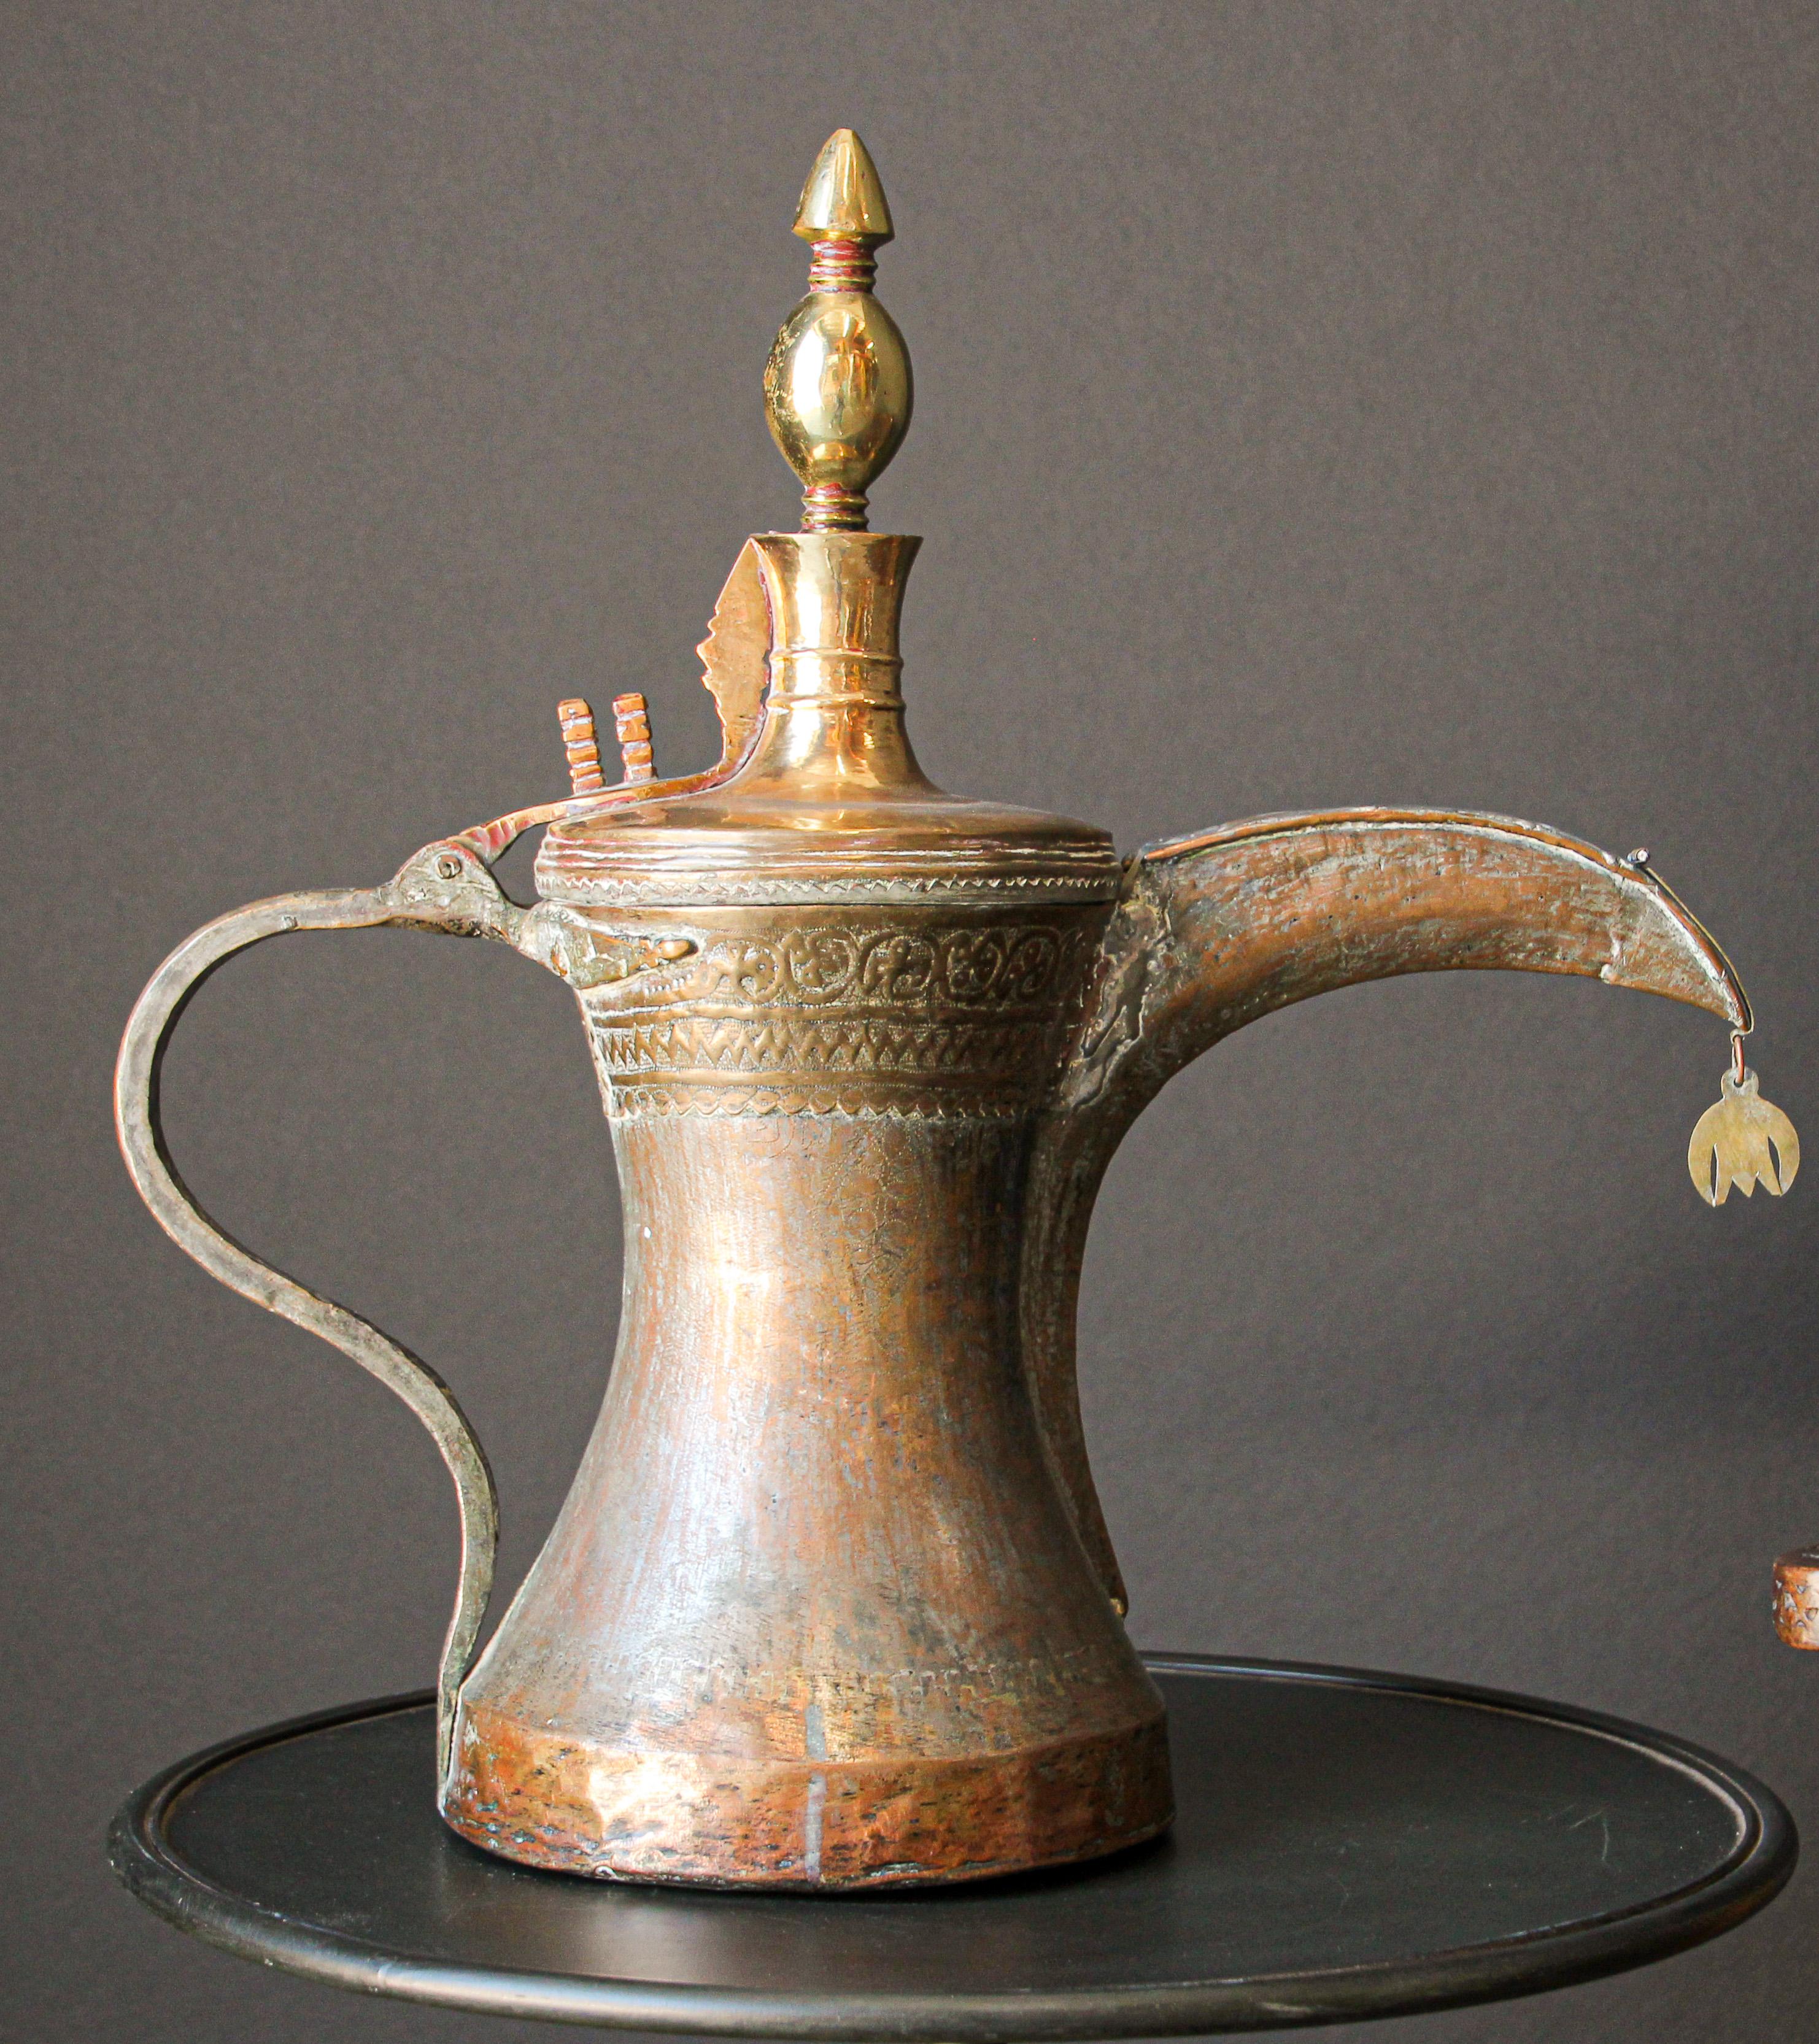 19th century Middle Eastern Arabian oversized tinned copper Dallah coffee pot.
Huge oversized antique Arabic Bedouin Dallah brass coffee pot hand-hammered and chased copper with riveted finish.
This Middle Eastern Dallah Arabic Bedouin coffee pot